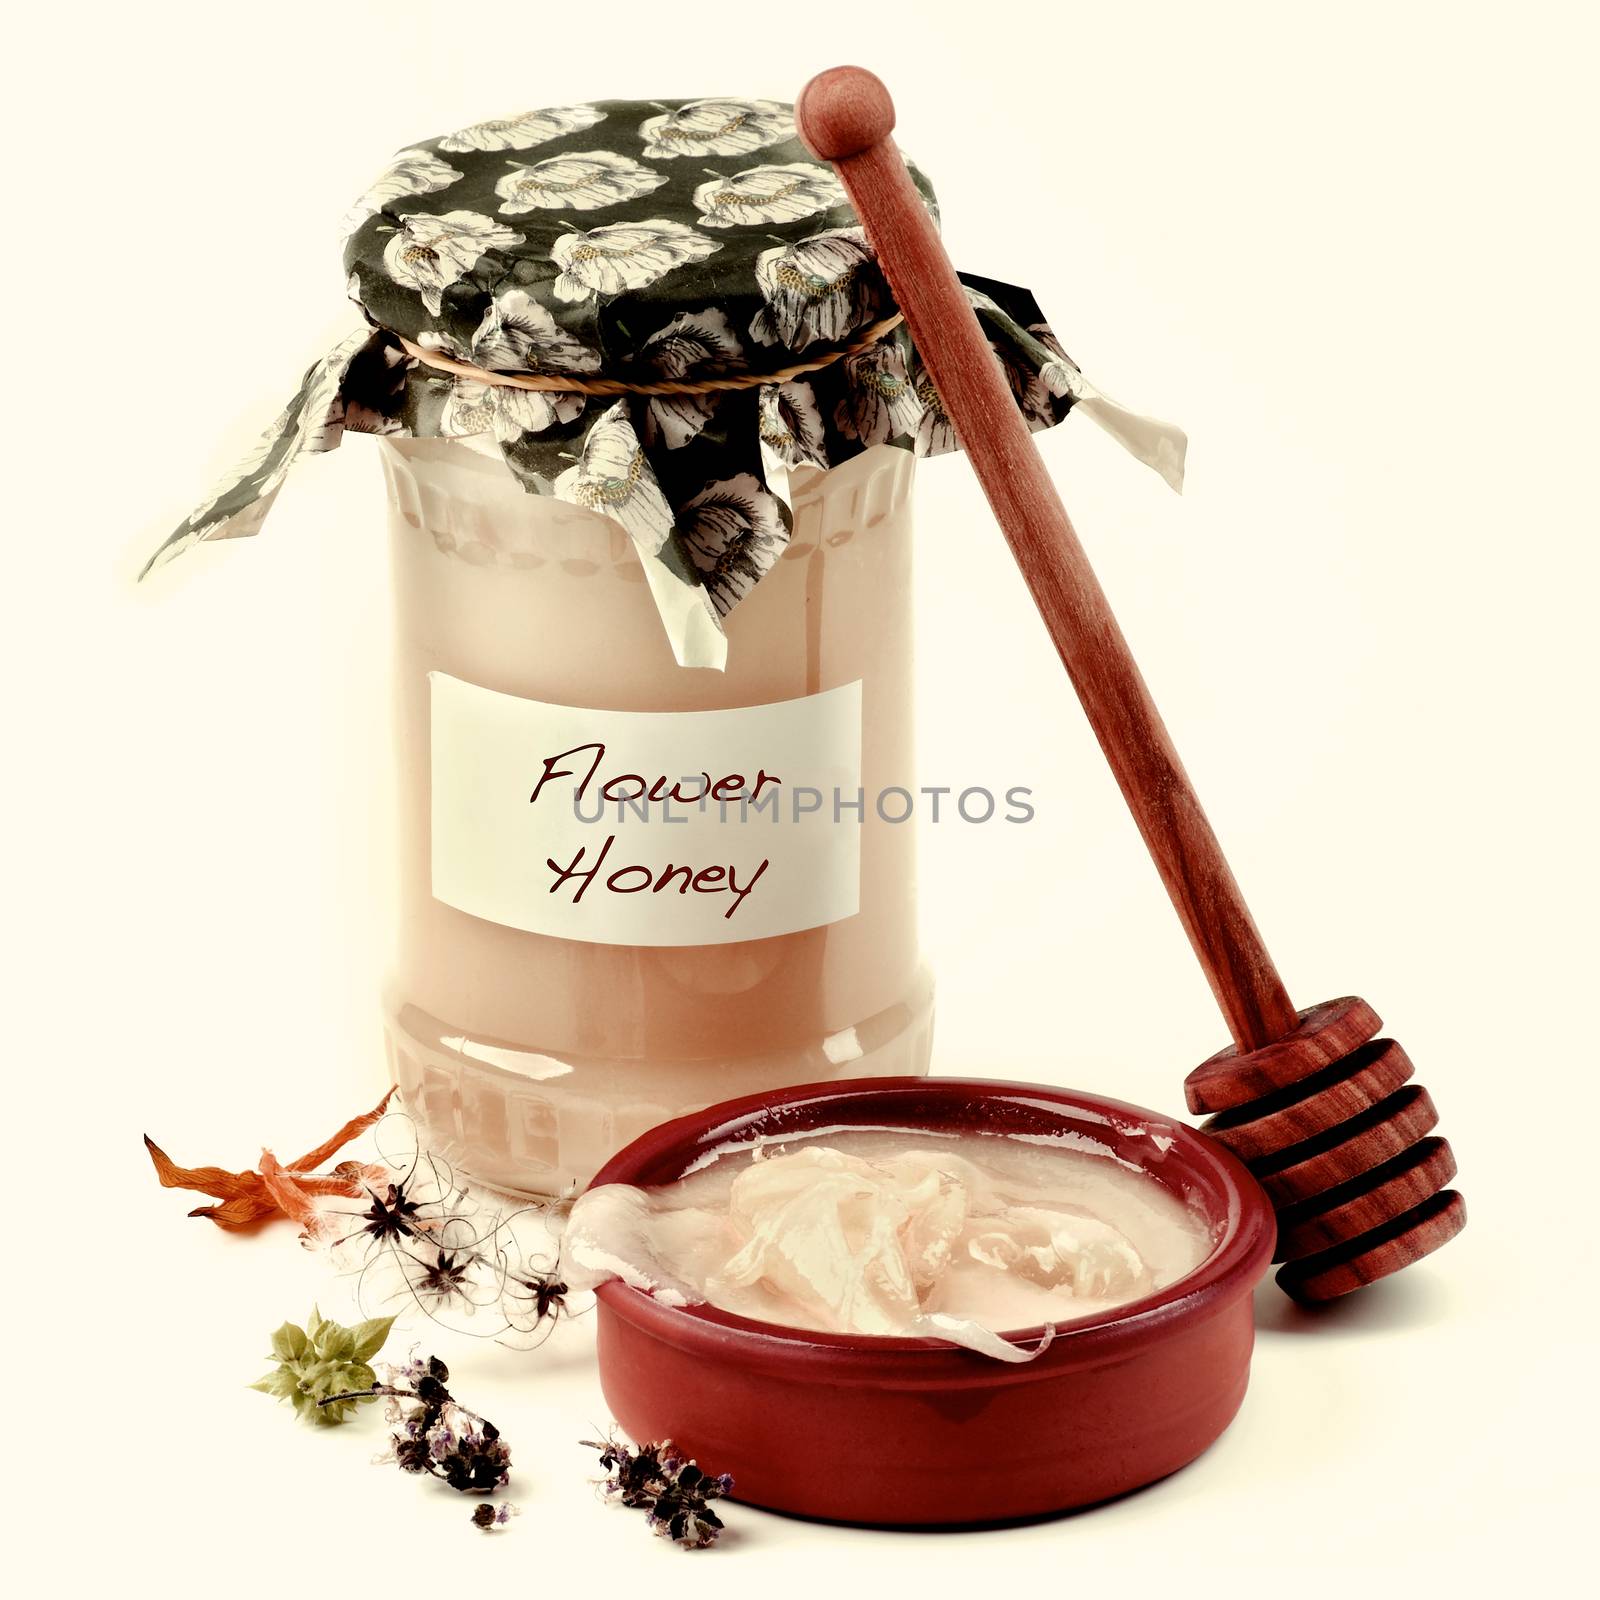 Arrangement of Flower Honey in Glass Jar, Honey Dipper and Bowl with Honey closeup on White background. Retro Styled